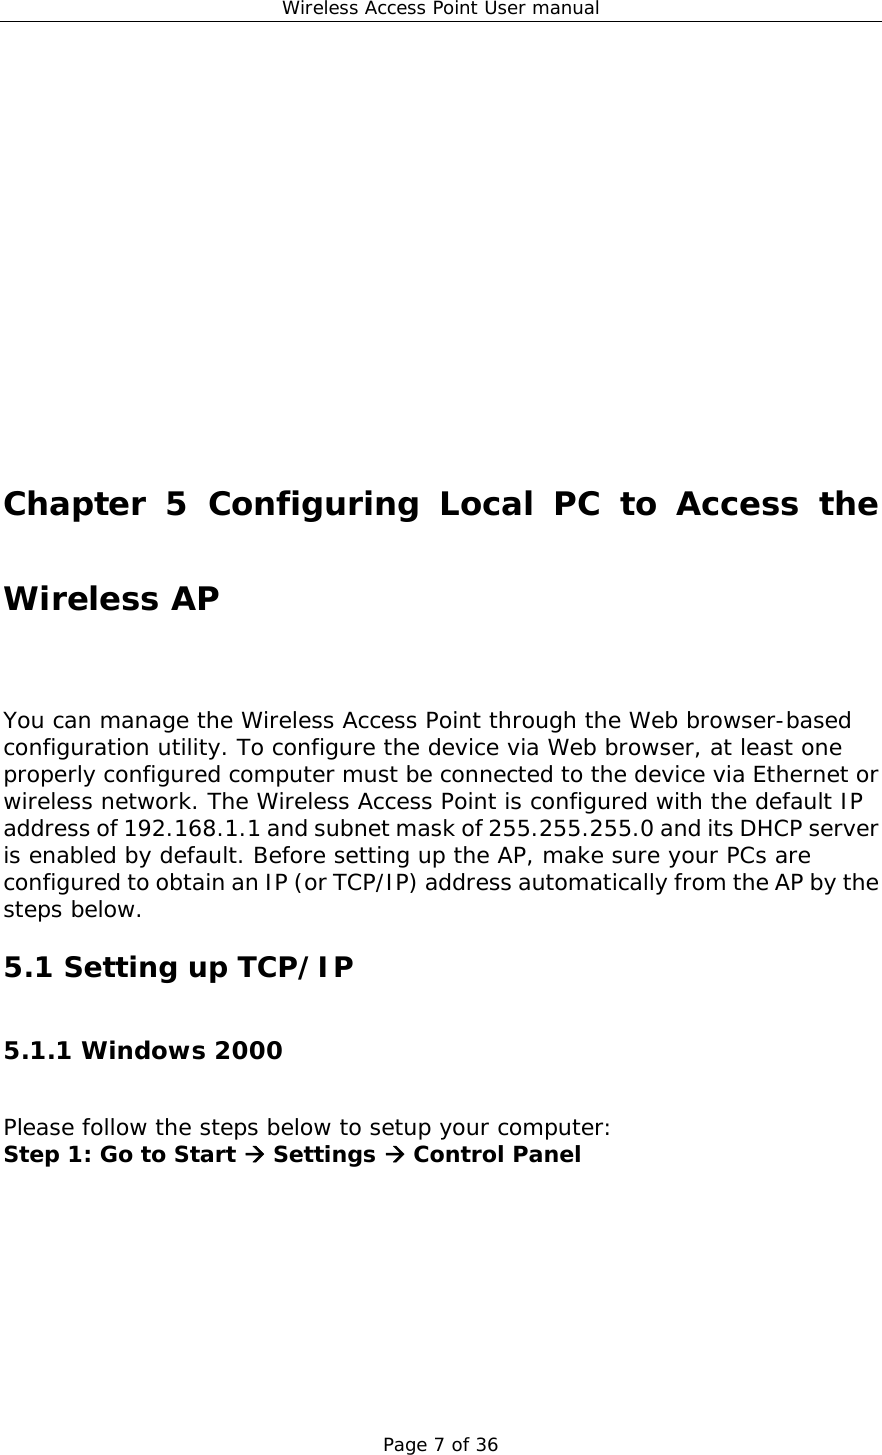 Wireless Access Point User manual Page 7 of 36               Chapter 5 Configuring Local PC to Access the Wireless AP You can manage the Wireless Access Point through the Web browser-based configuration utility. To configure the device via Web browser, at least one properly configured computer must be connected to the device via Ethernet or wireless network. The Wireless Access Point is configured with the default IP address of 192.168.1.1 and subnet mask of 255.255.255.0 and its DHCP server is enabled by default. Before setting up the AP, make sure your PCs are configured to obtain an IP (or TCP/IP) address automatically from the AP by the steps below. 5.1 Setting up TCP/IP 5.1.1 Windows 2000 Please follow the steps below to setup your computer: Step 1: Go to Start Æ Settings Æ Control Panel 